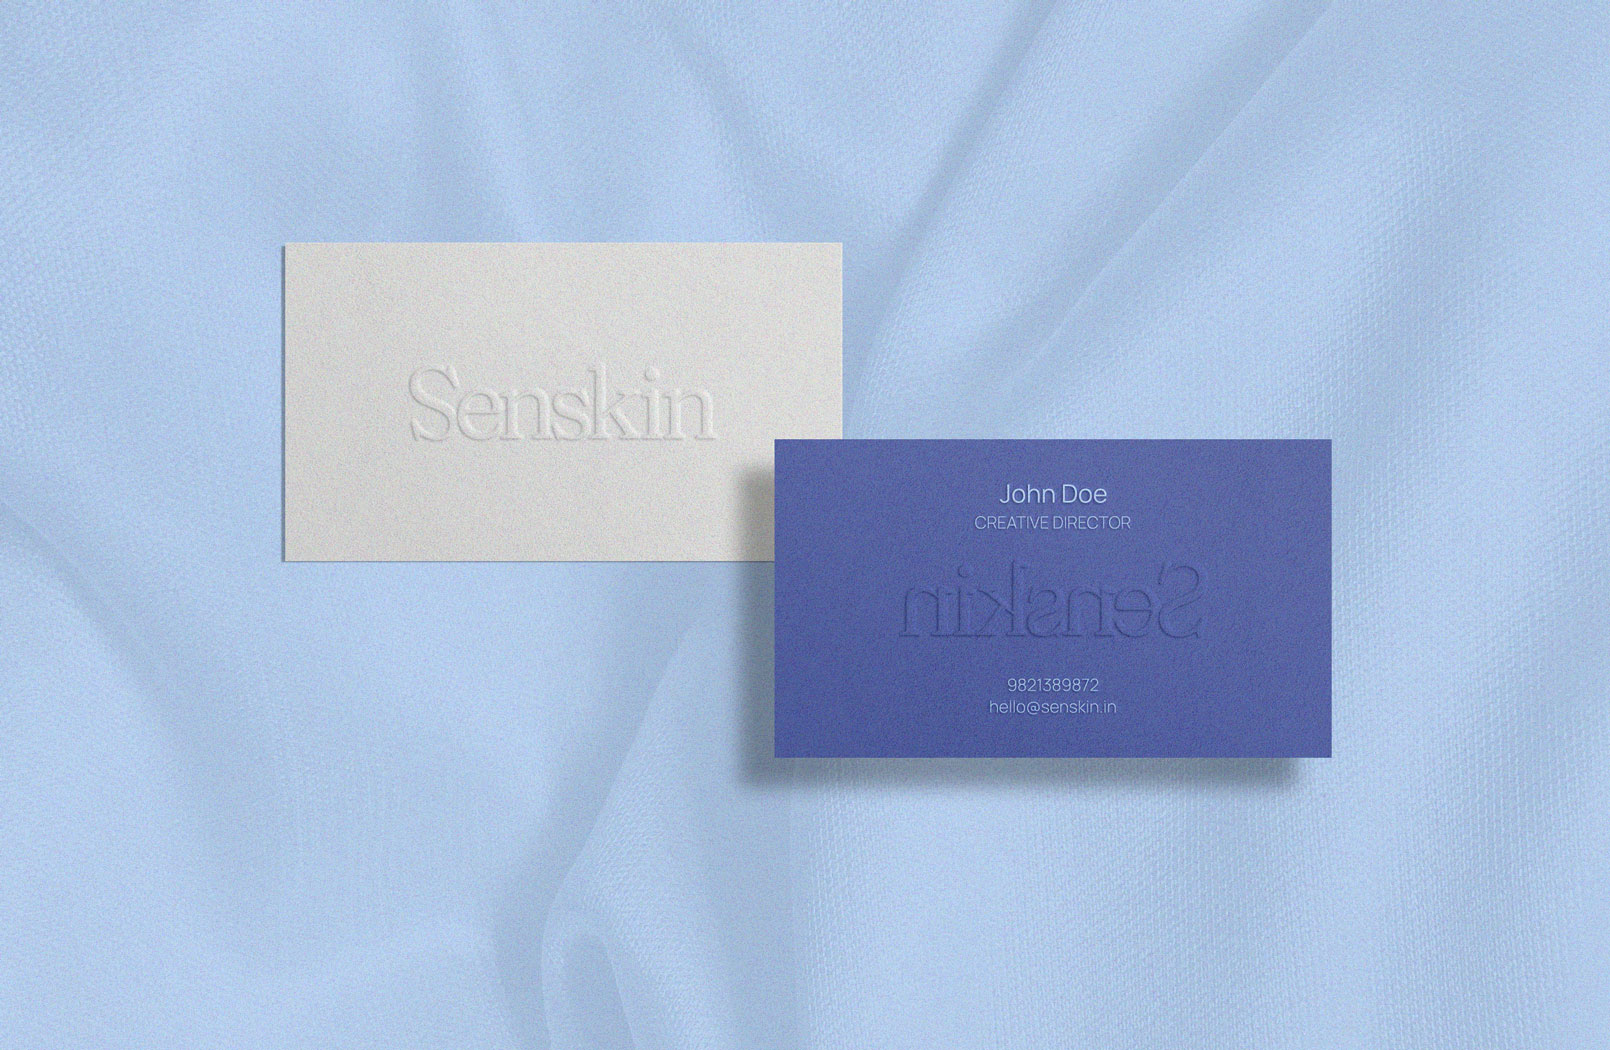 Business cards for a Senskin employee.